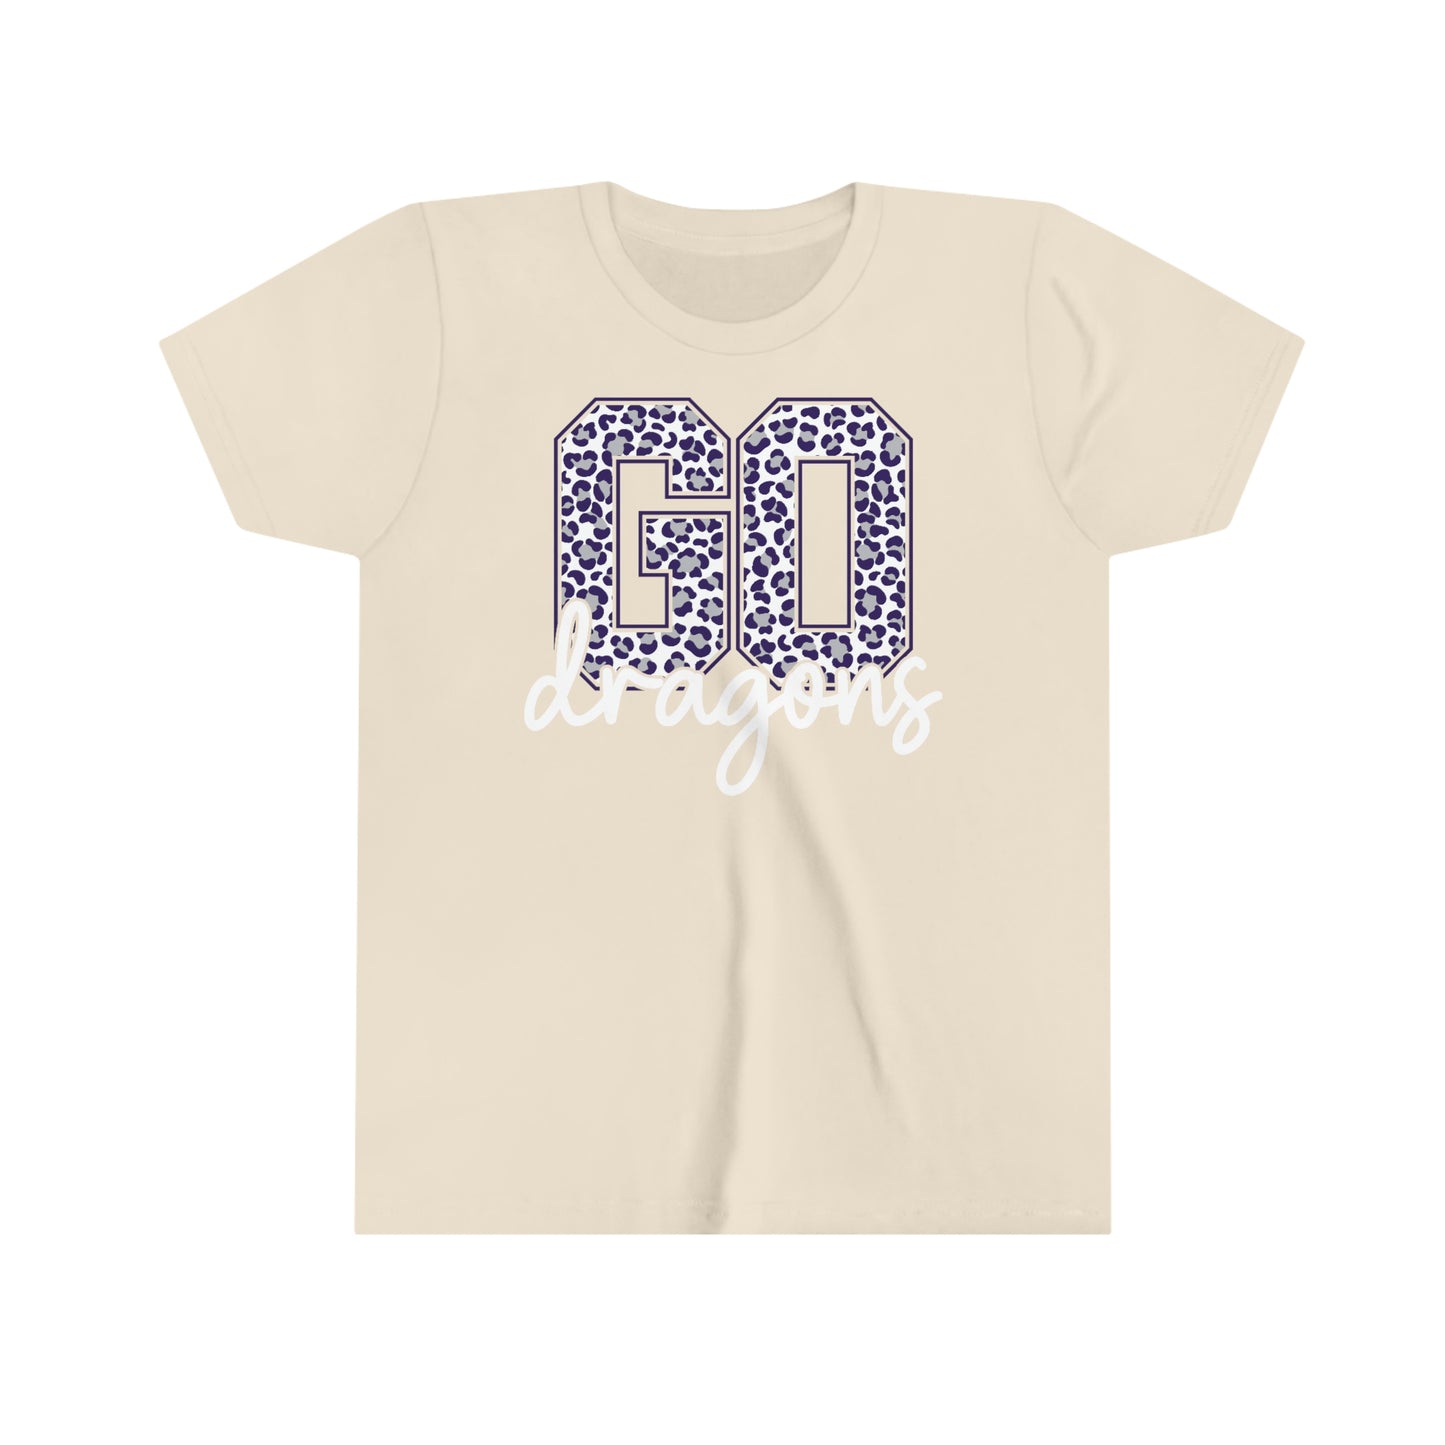 Leopard Go Dragons Youth Tee